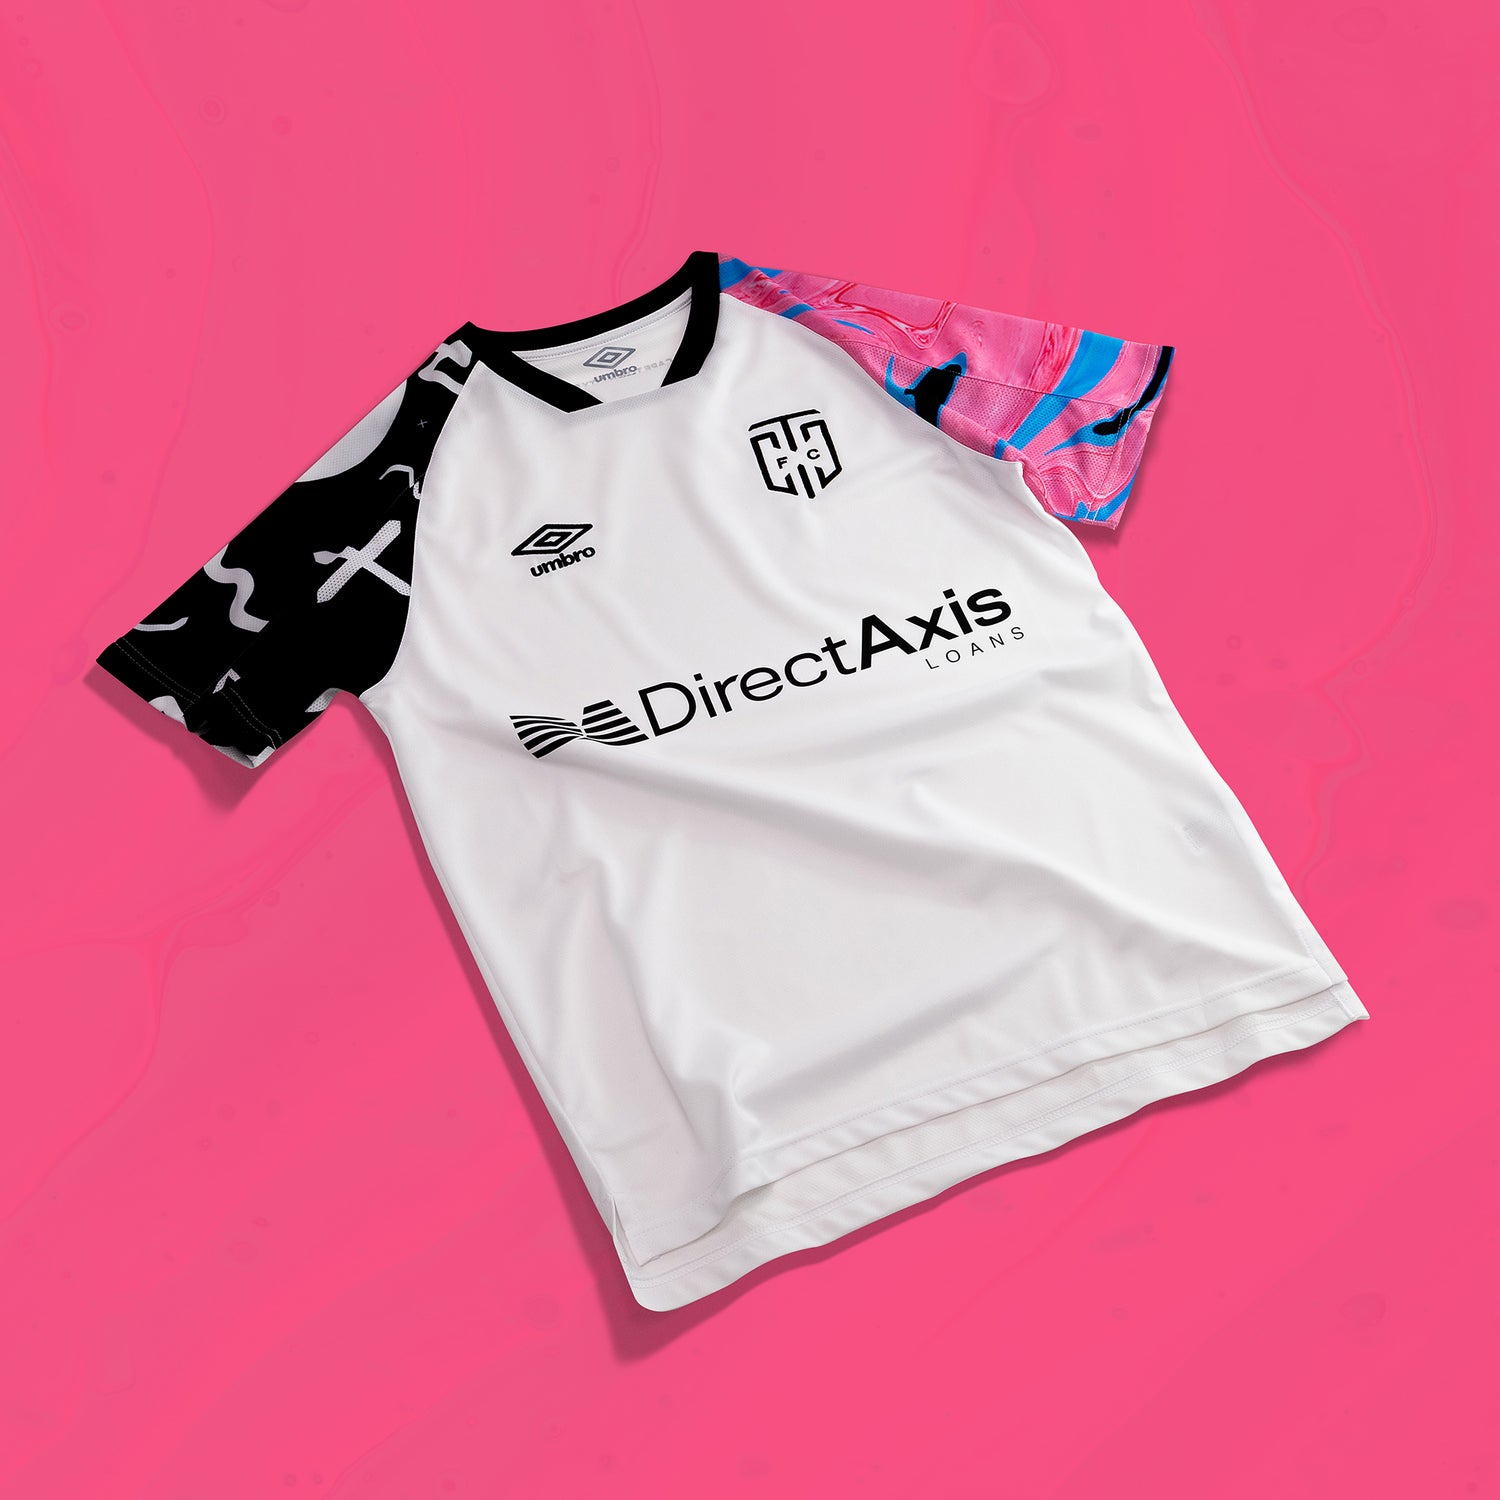 Umbro flat lay photography and creative graphics